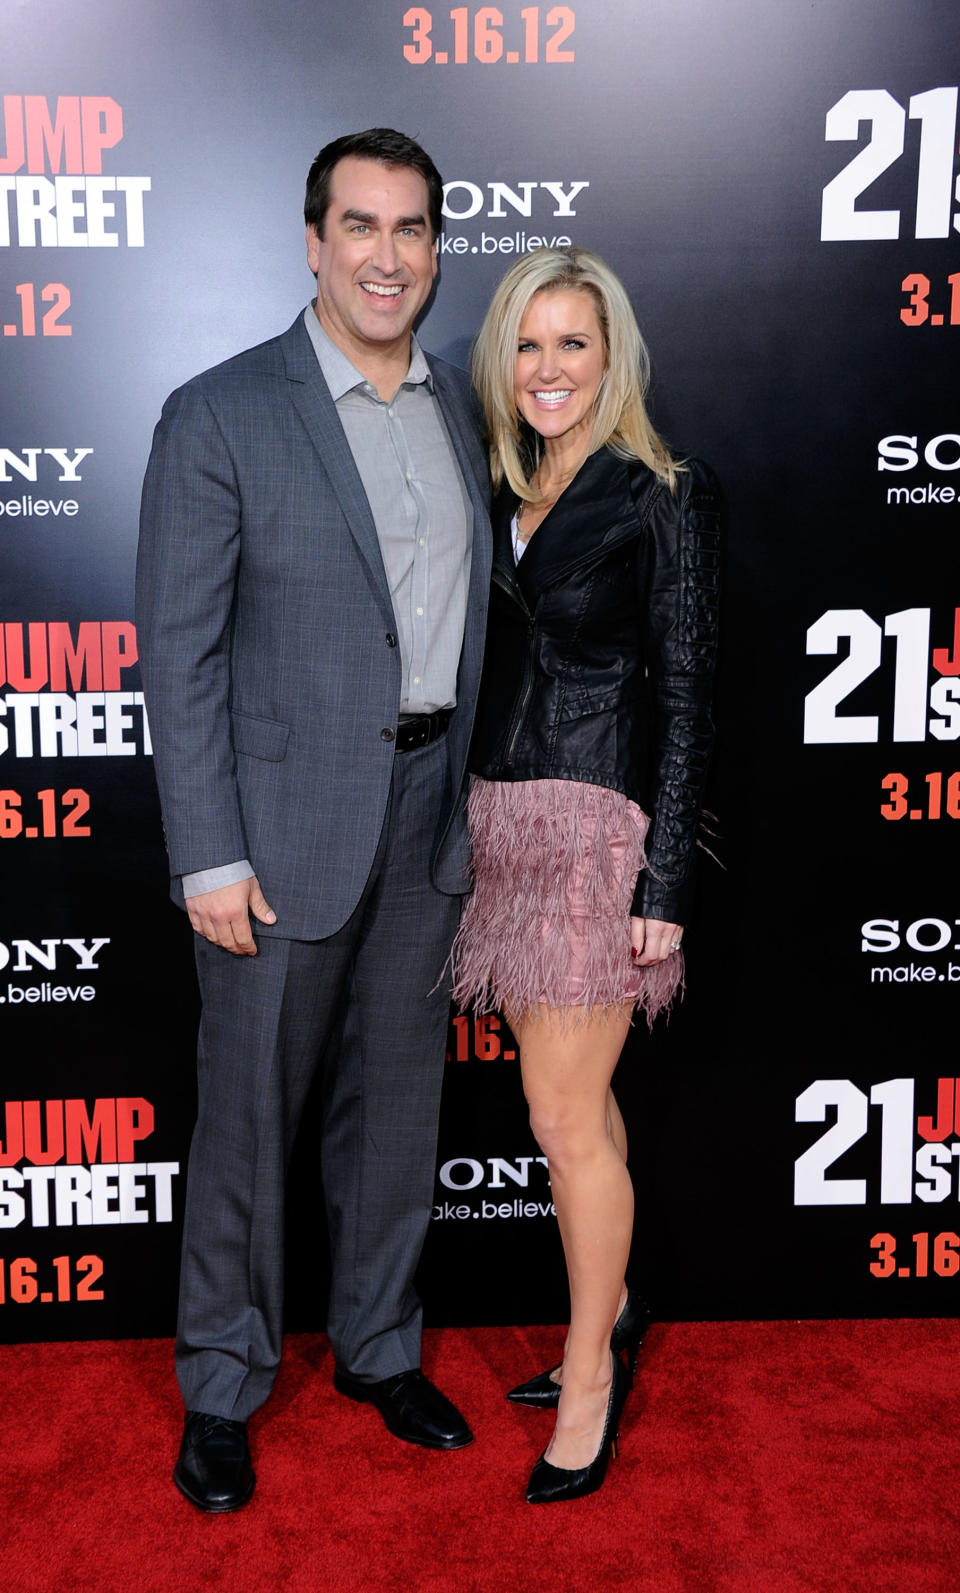 Premiere Of Columbia Pictures' "21 Jump Street" - Arrivals